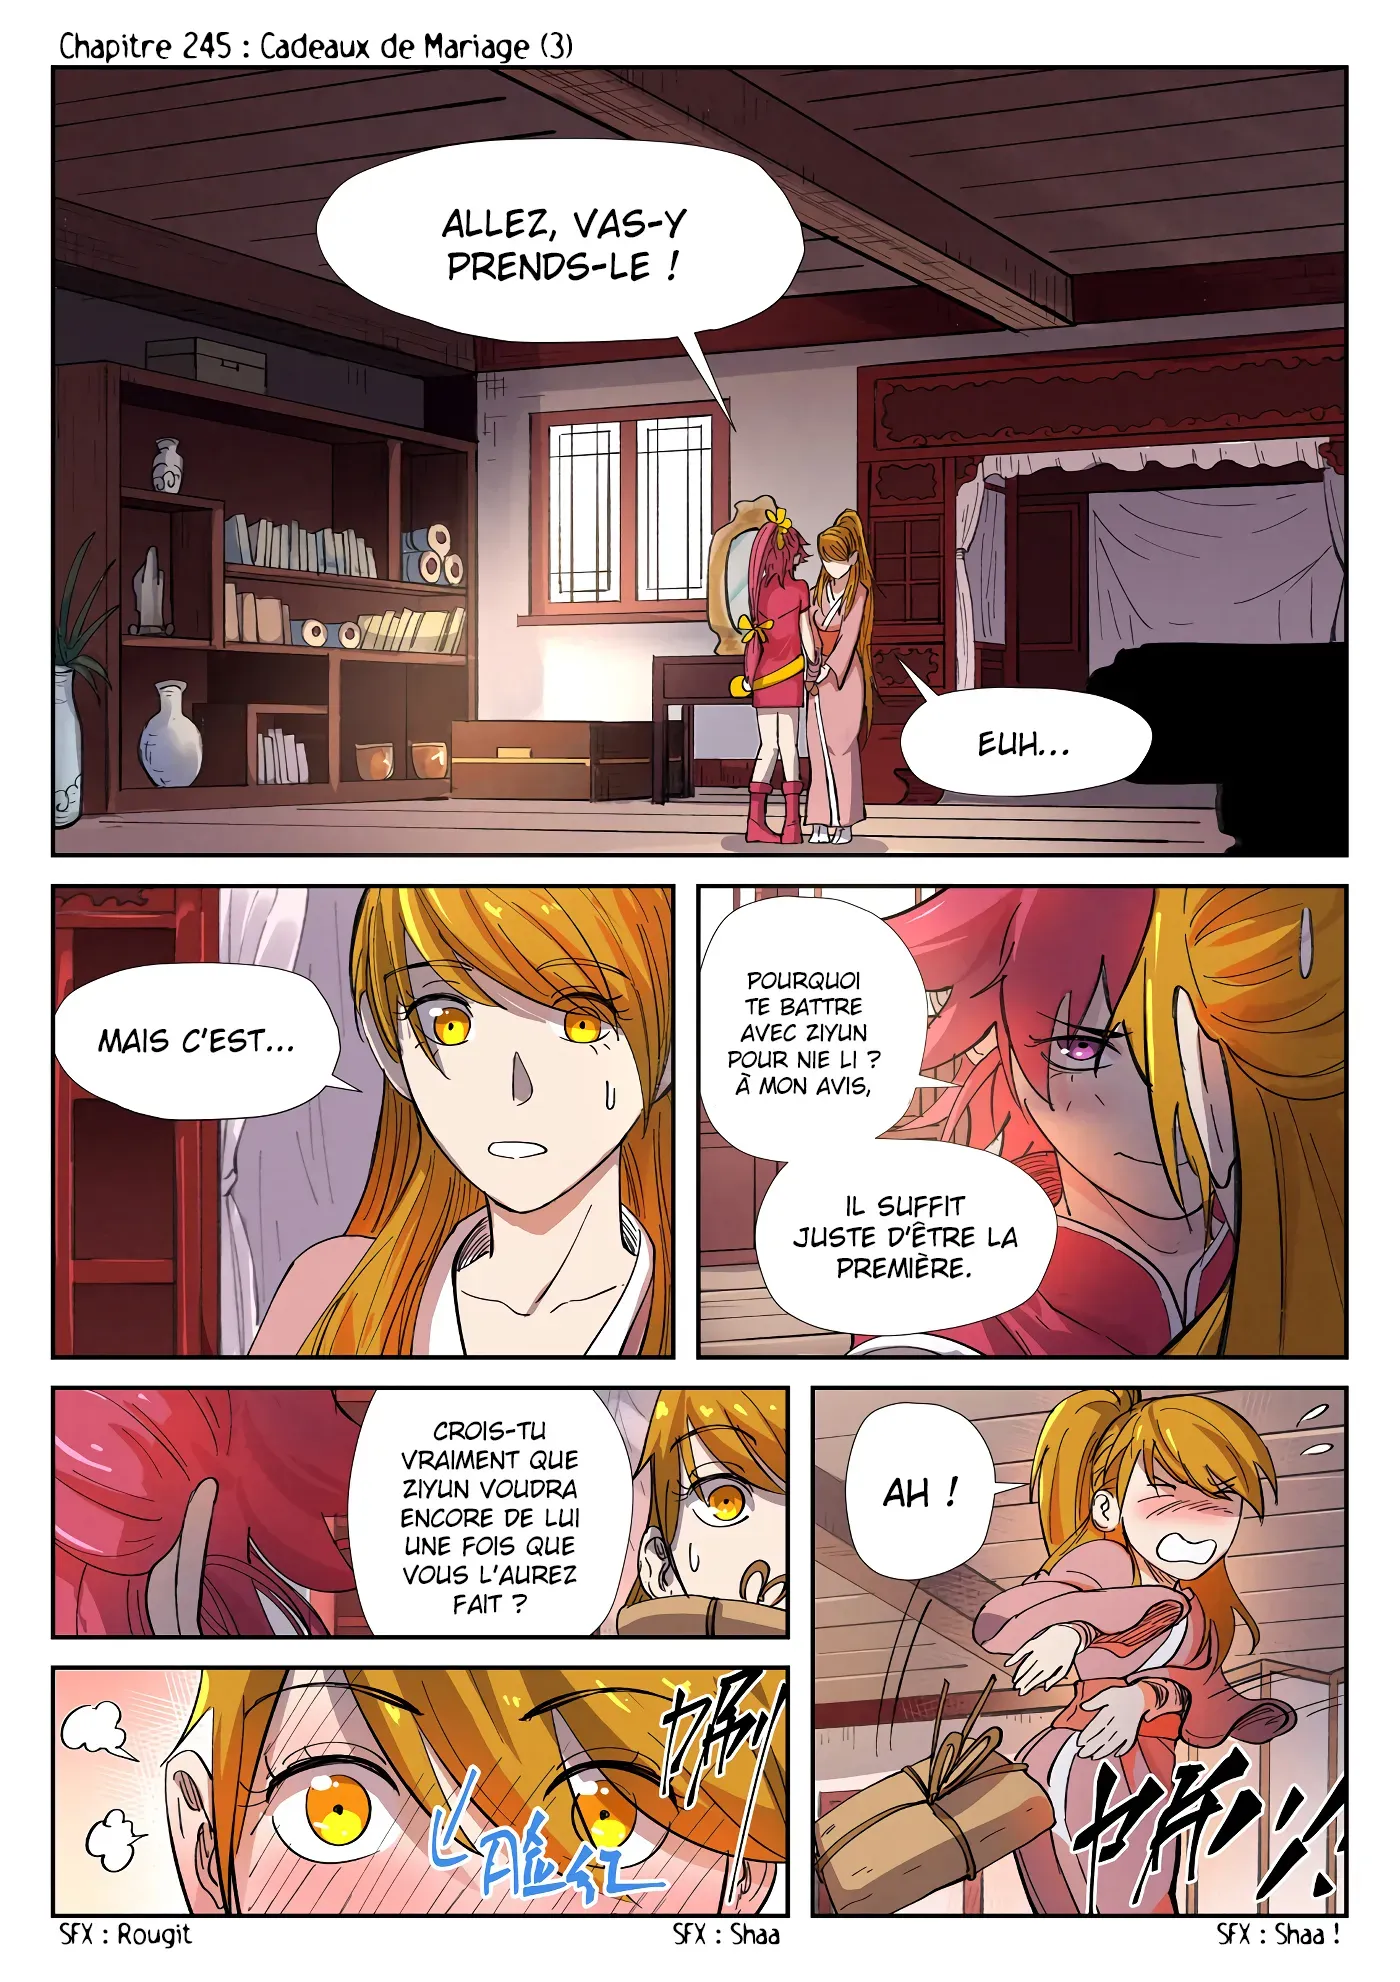 Tales Of Demons And Gods: Chapter chapitre-245 - Page 1